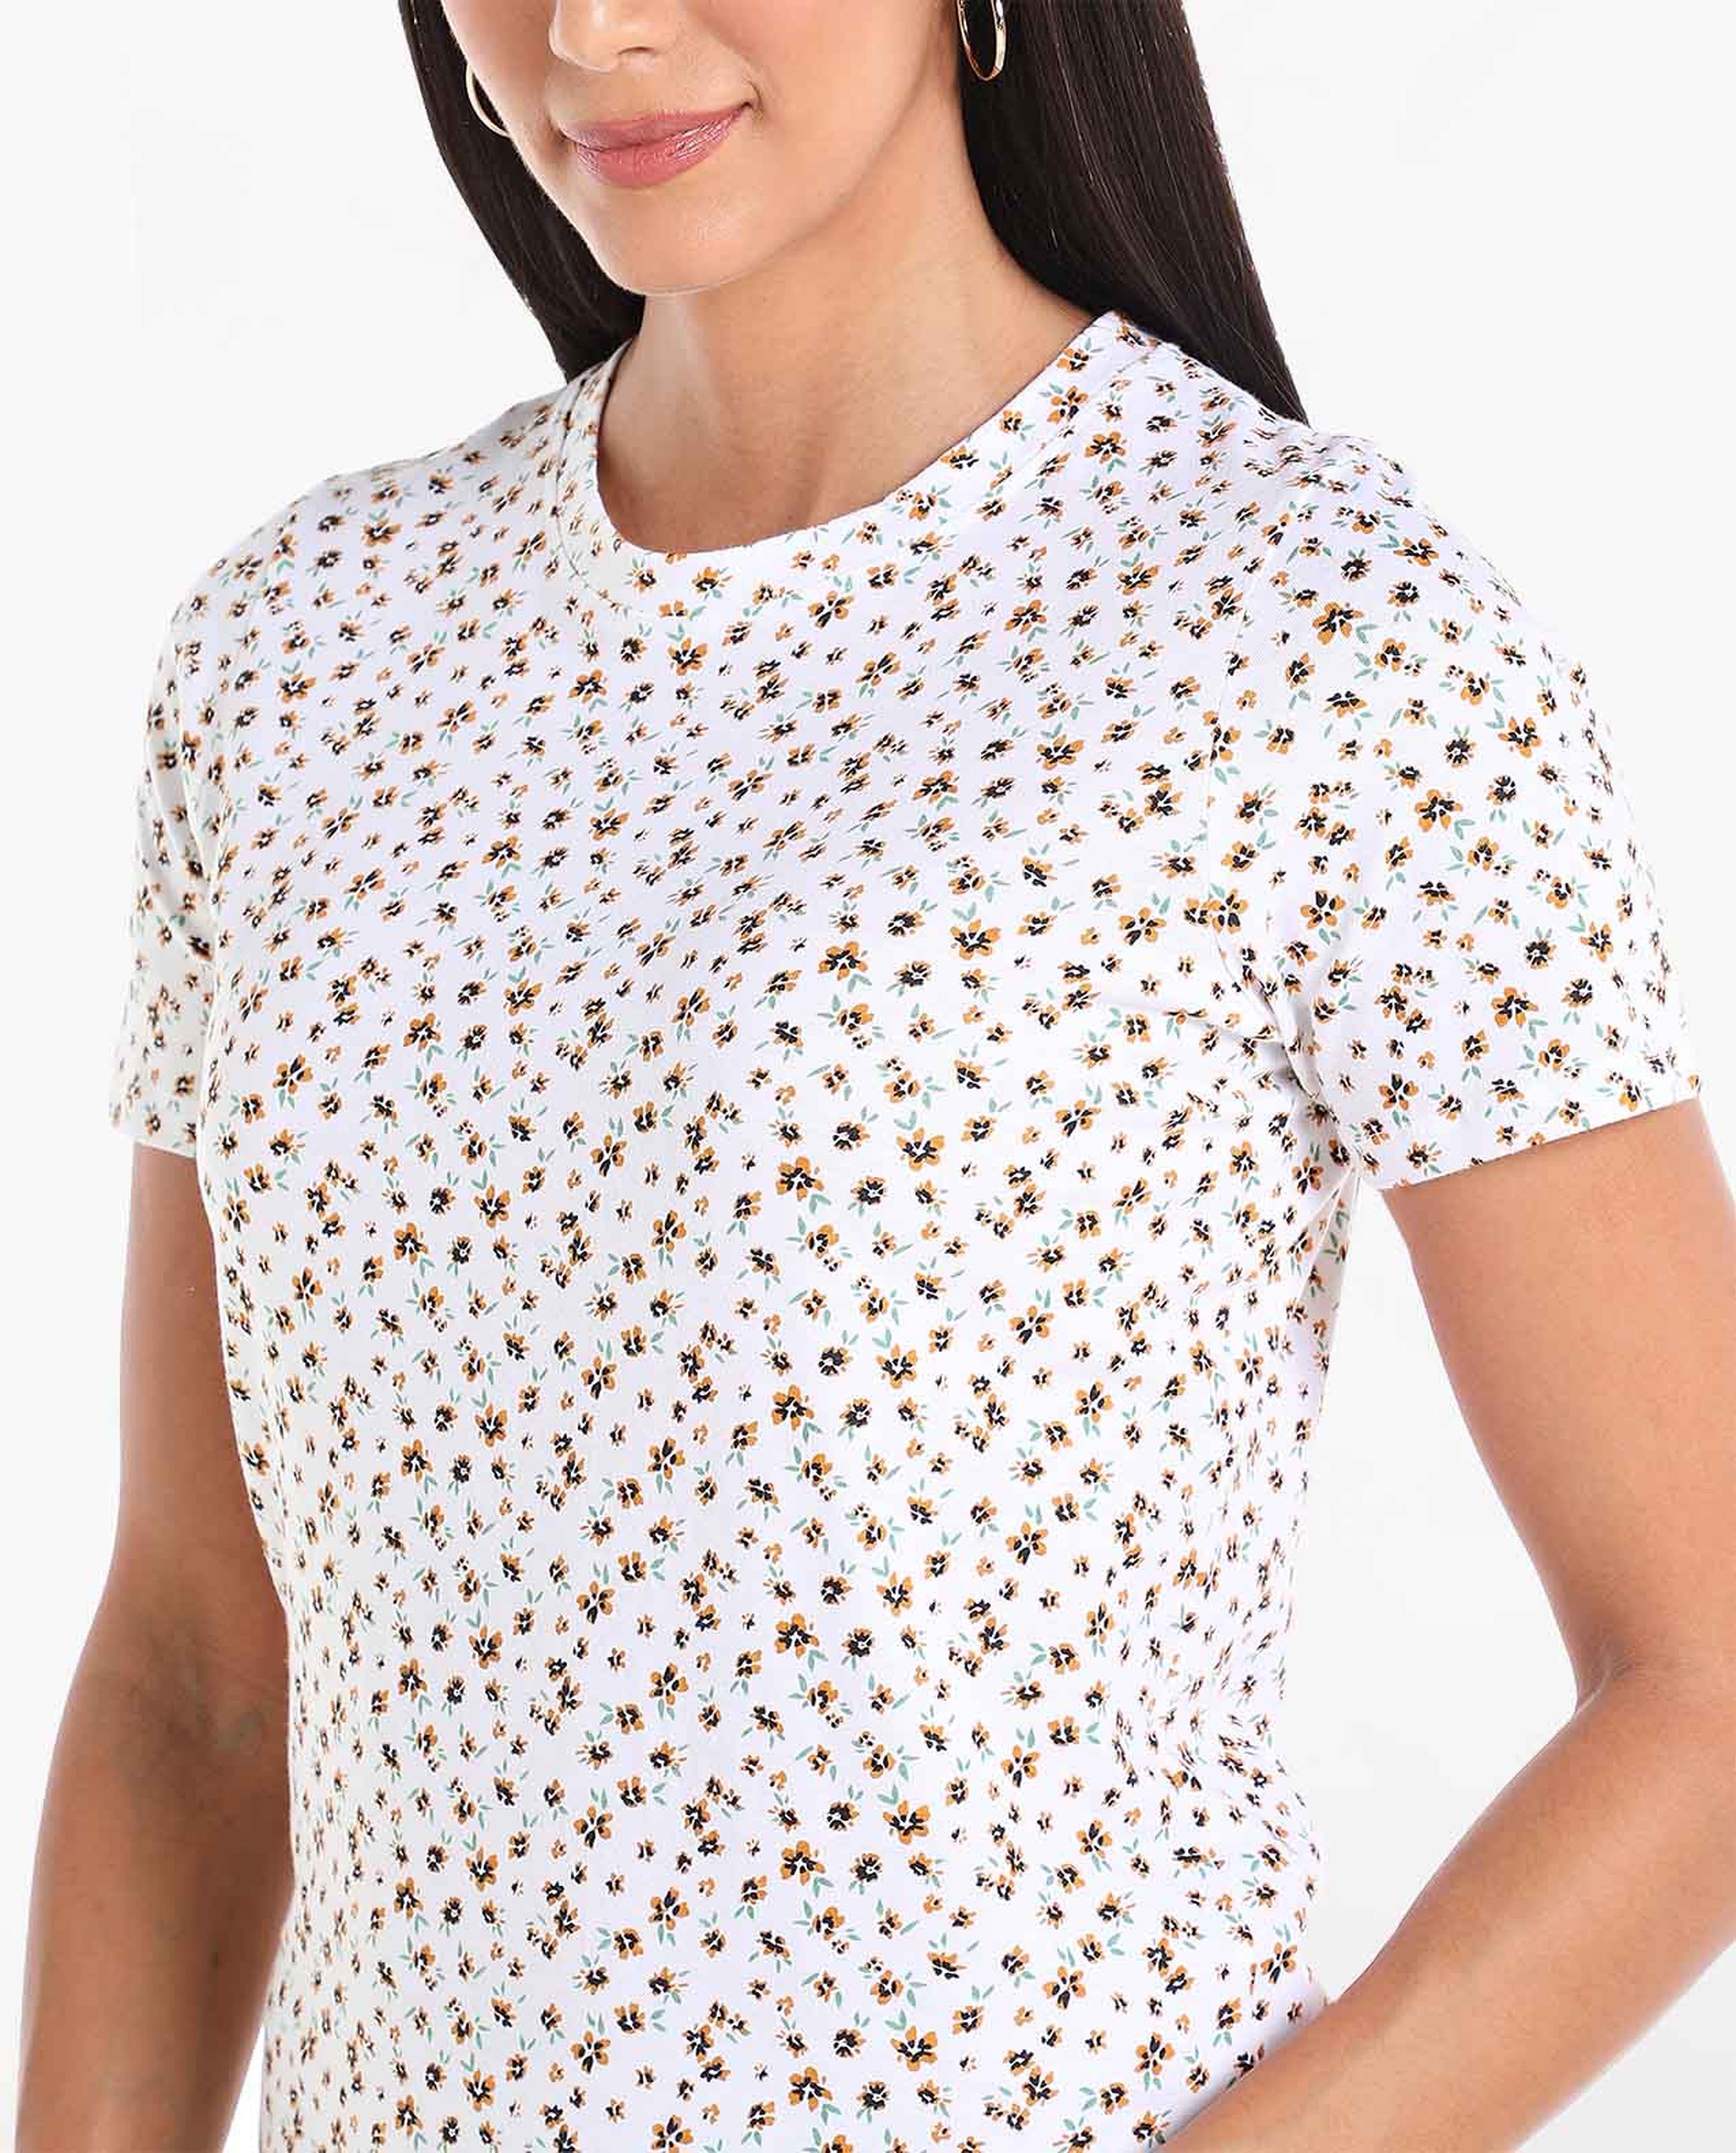 Floral Printed T-Shirt with Round Neck and Short Sleeves